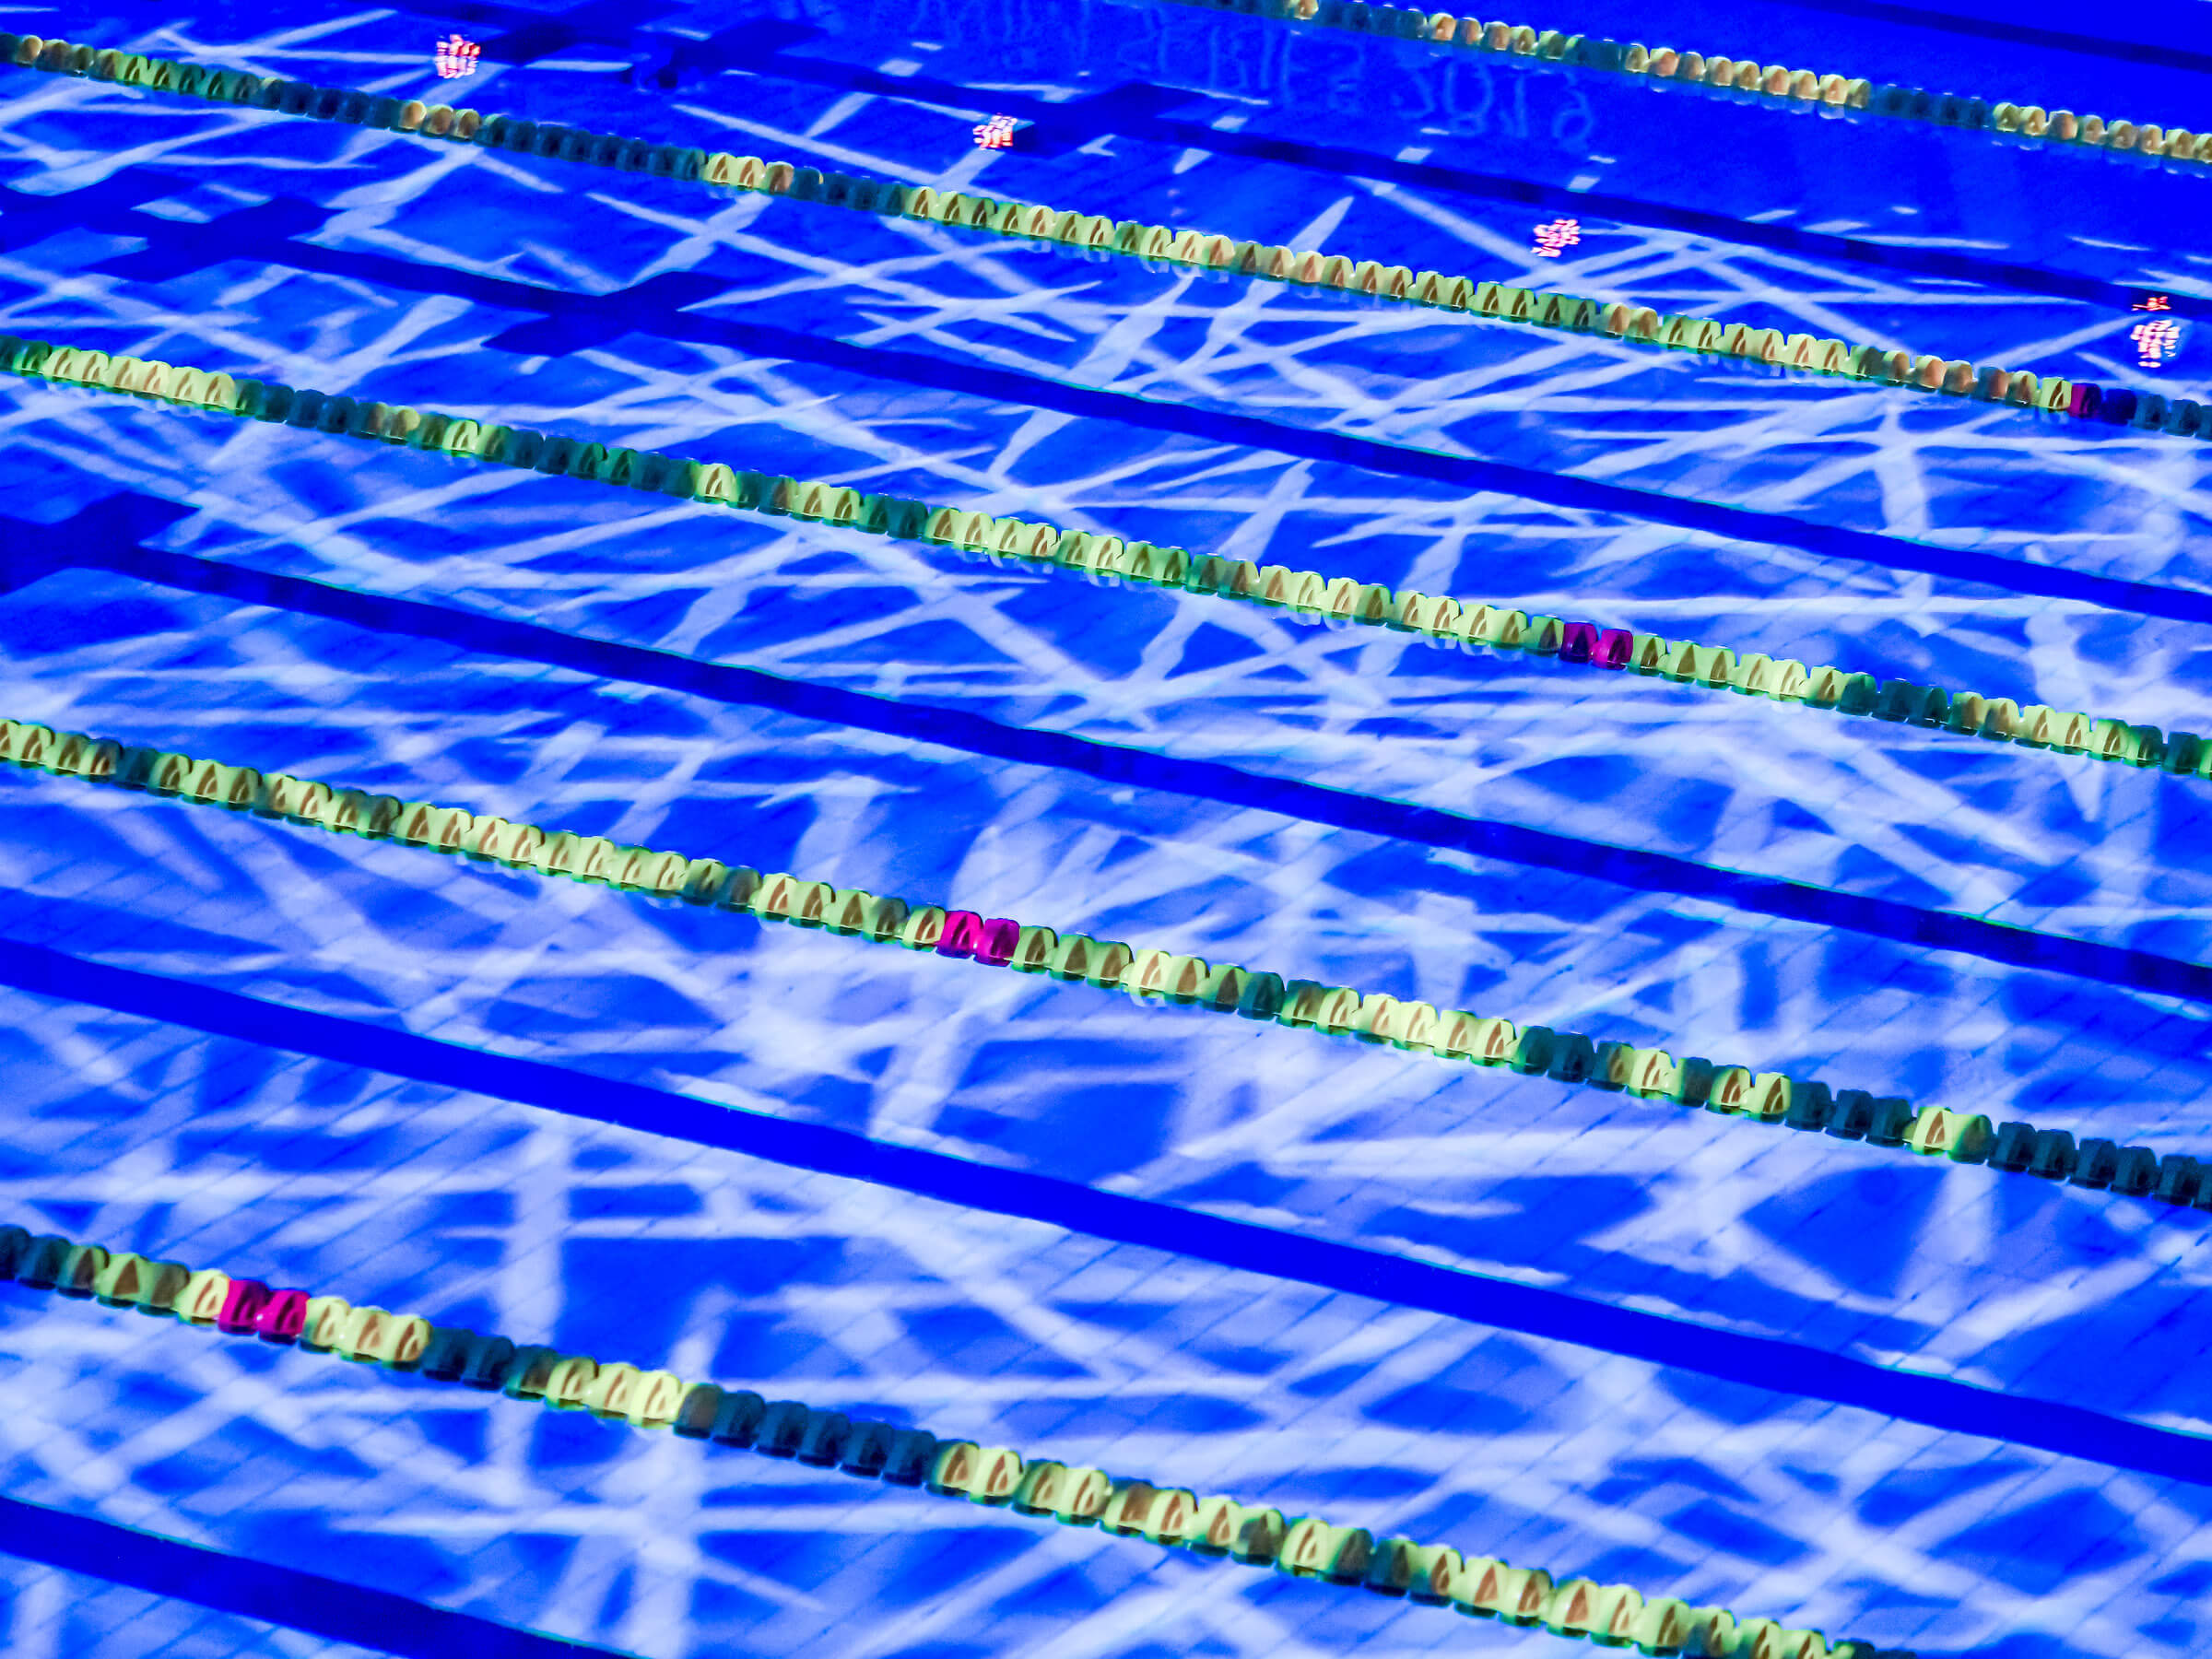 ESPN3 to Provide Coverage of International Swimming League